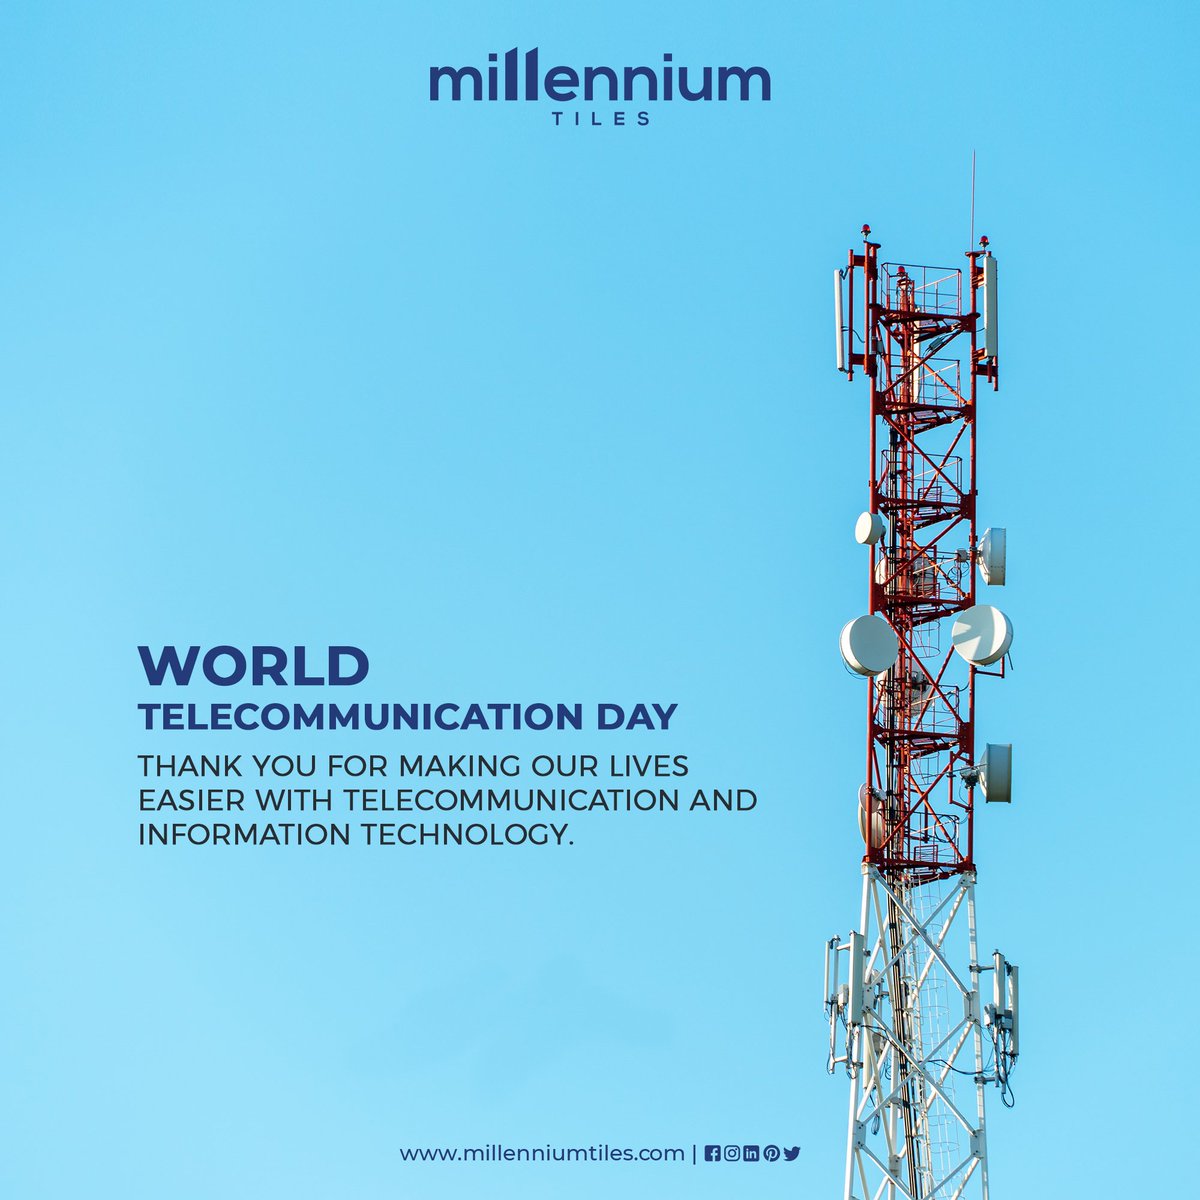 Thank you for making our lives easier with telecommunication and information technology.

𝐖𝐨𝐫𝐥𝐝 𝐓𝐞𝐥𝐞𝐜𝐨𝐦𝐦𝐮𝐧𝐢𝐚𝐜𝐭𝐢𝐨𝐧 𝐃𝐚𝐲

#WorldTelecommunicationDay #TelecommunicationDay #informationsociety #information #informationtechnology #technology #internet #Network